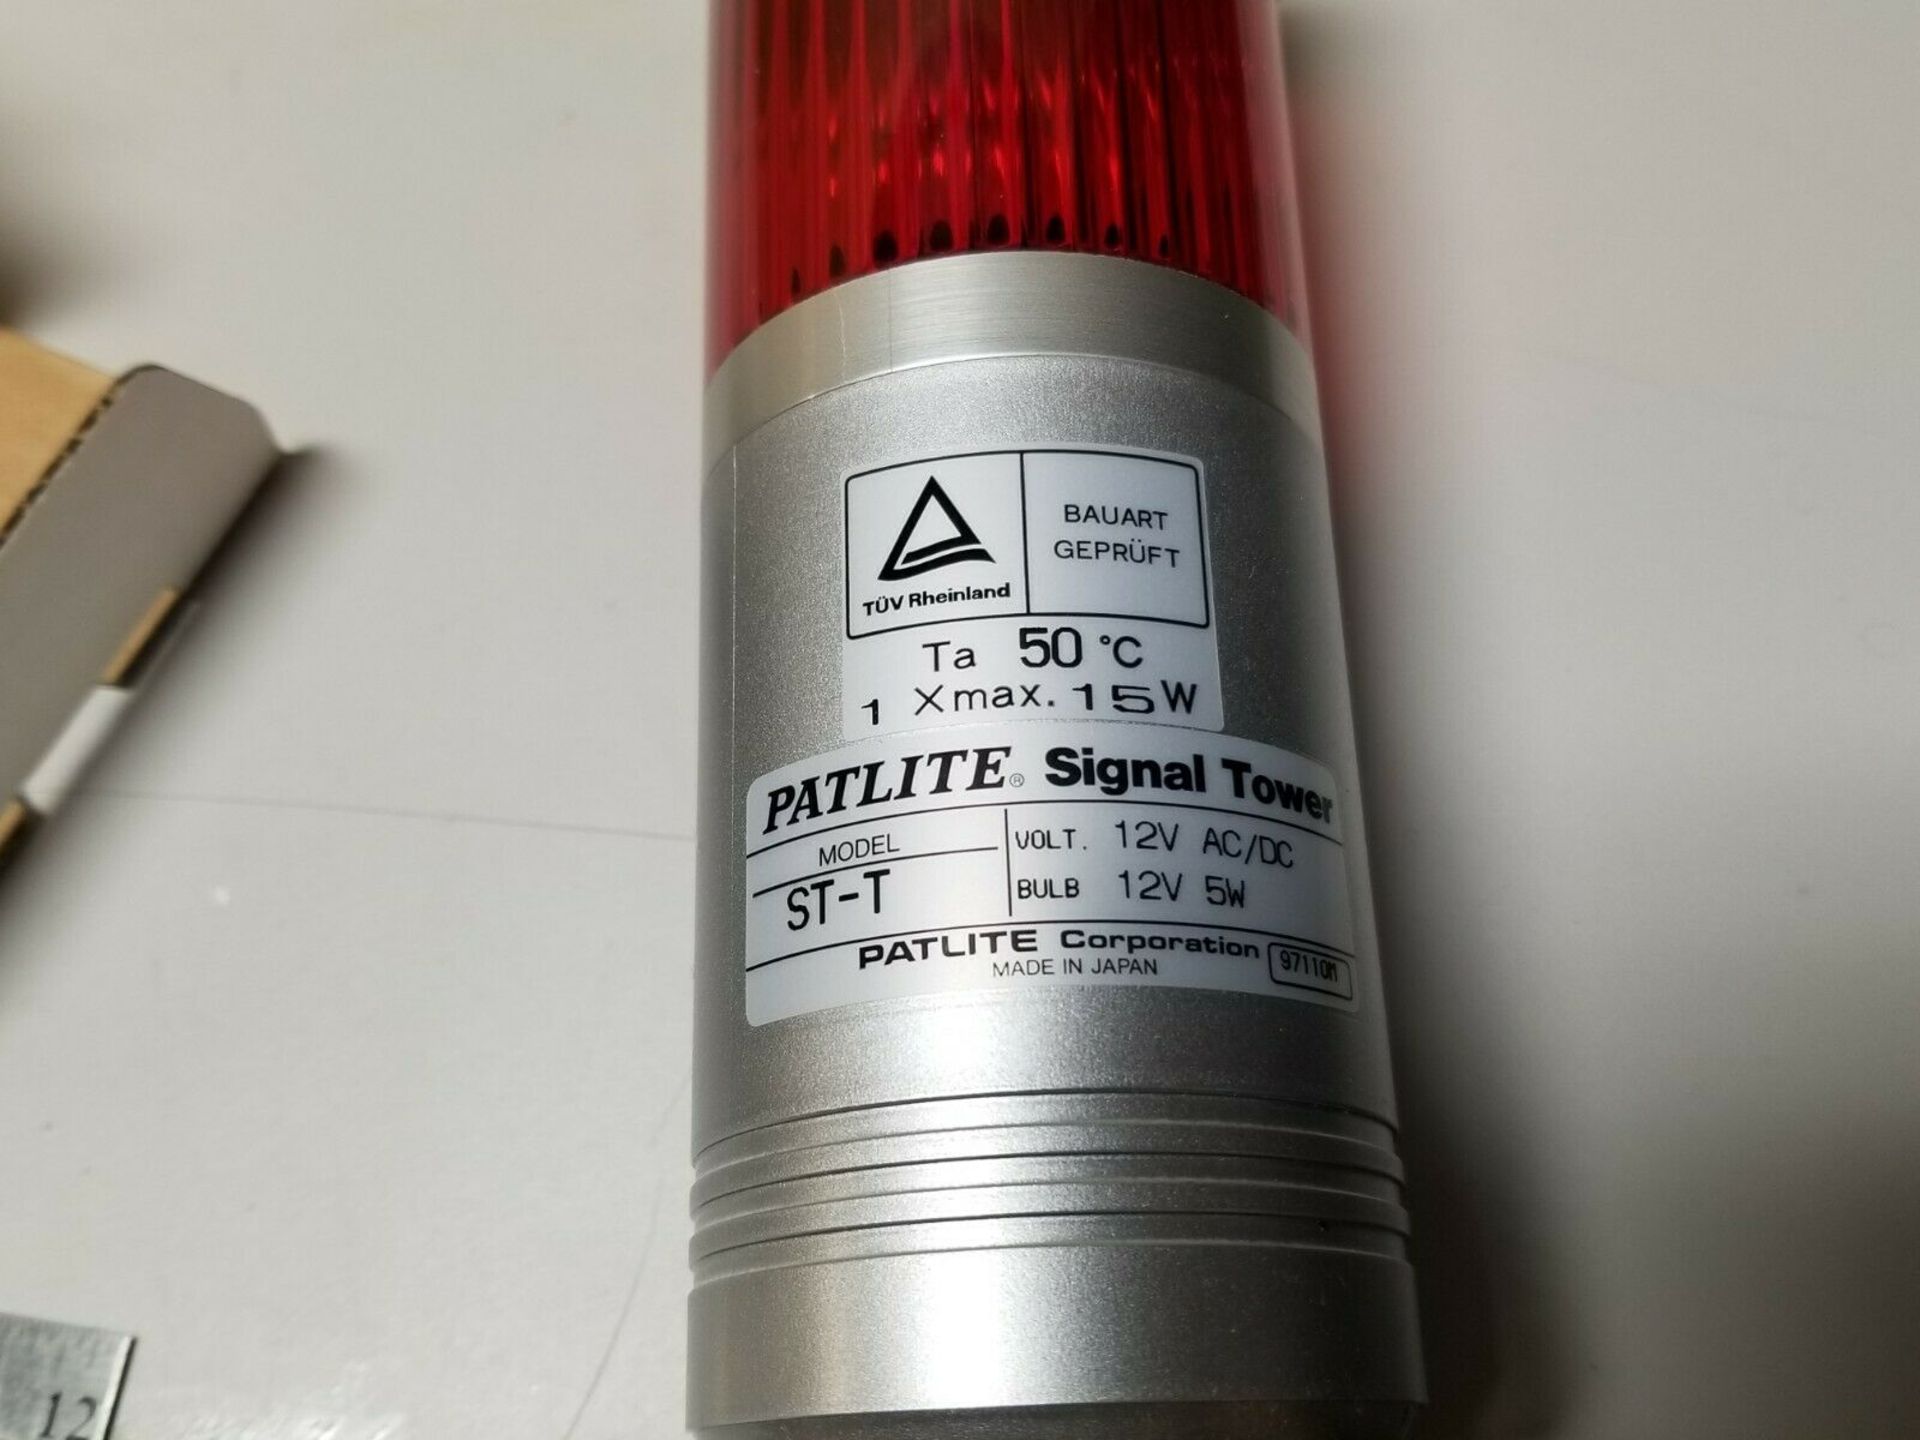 NEW PATLITE SAFETY LIGHT SIGNAL TOWER - Image 6 of 6